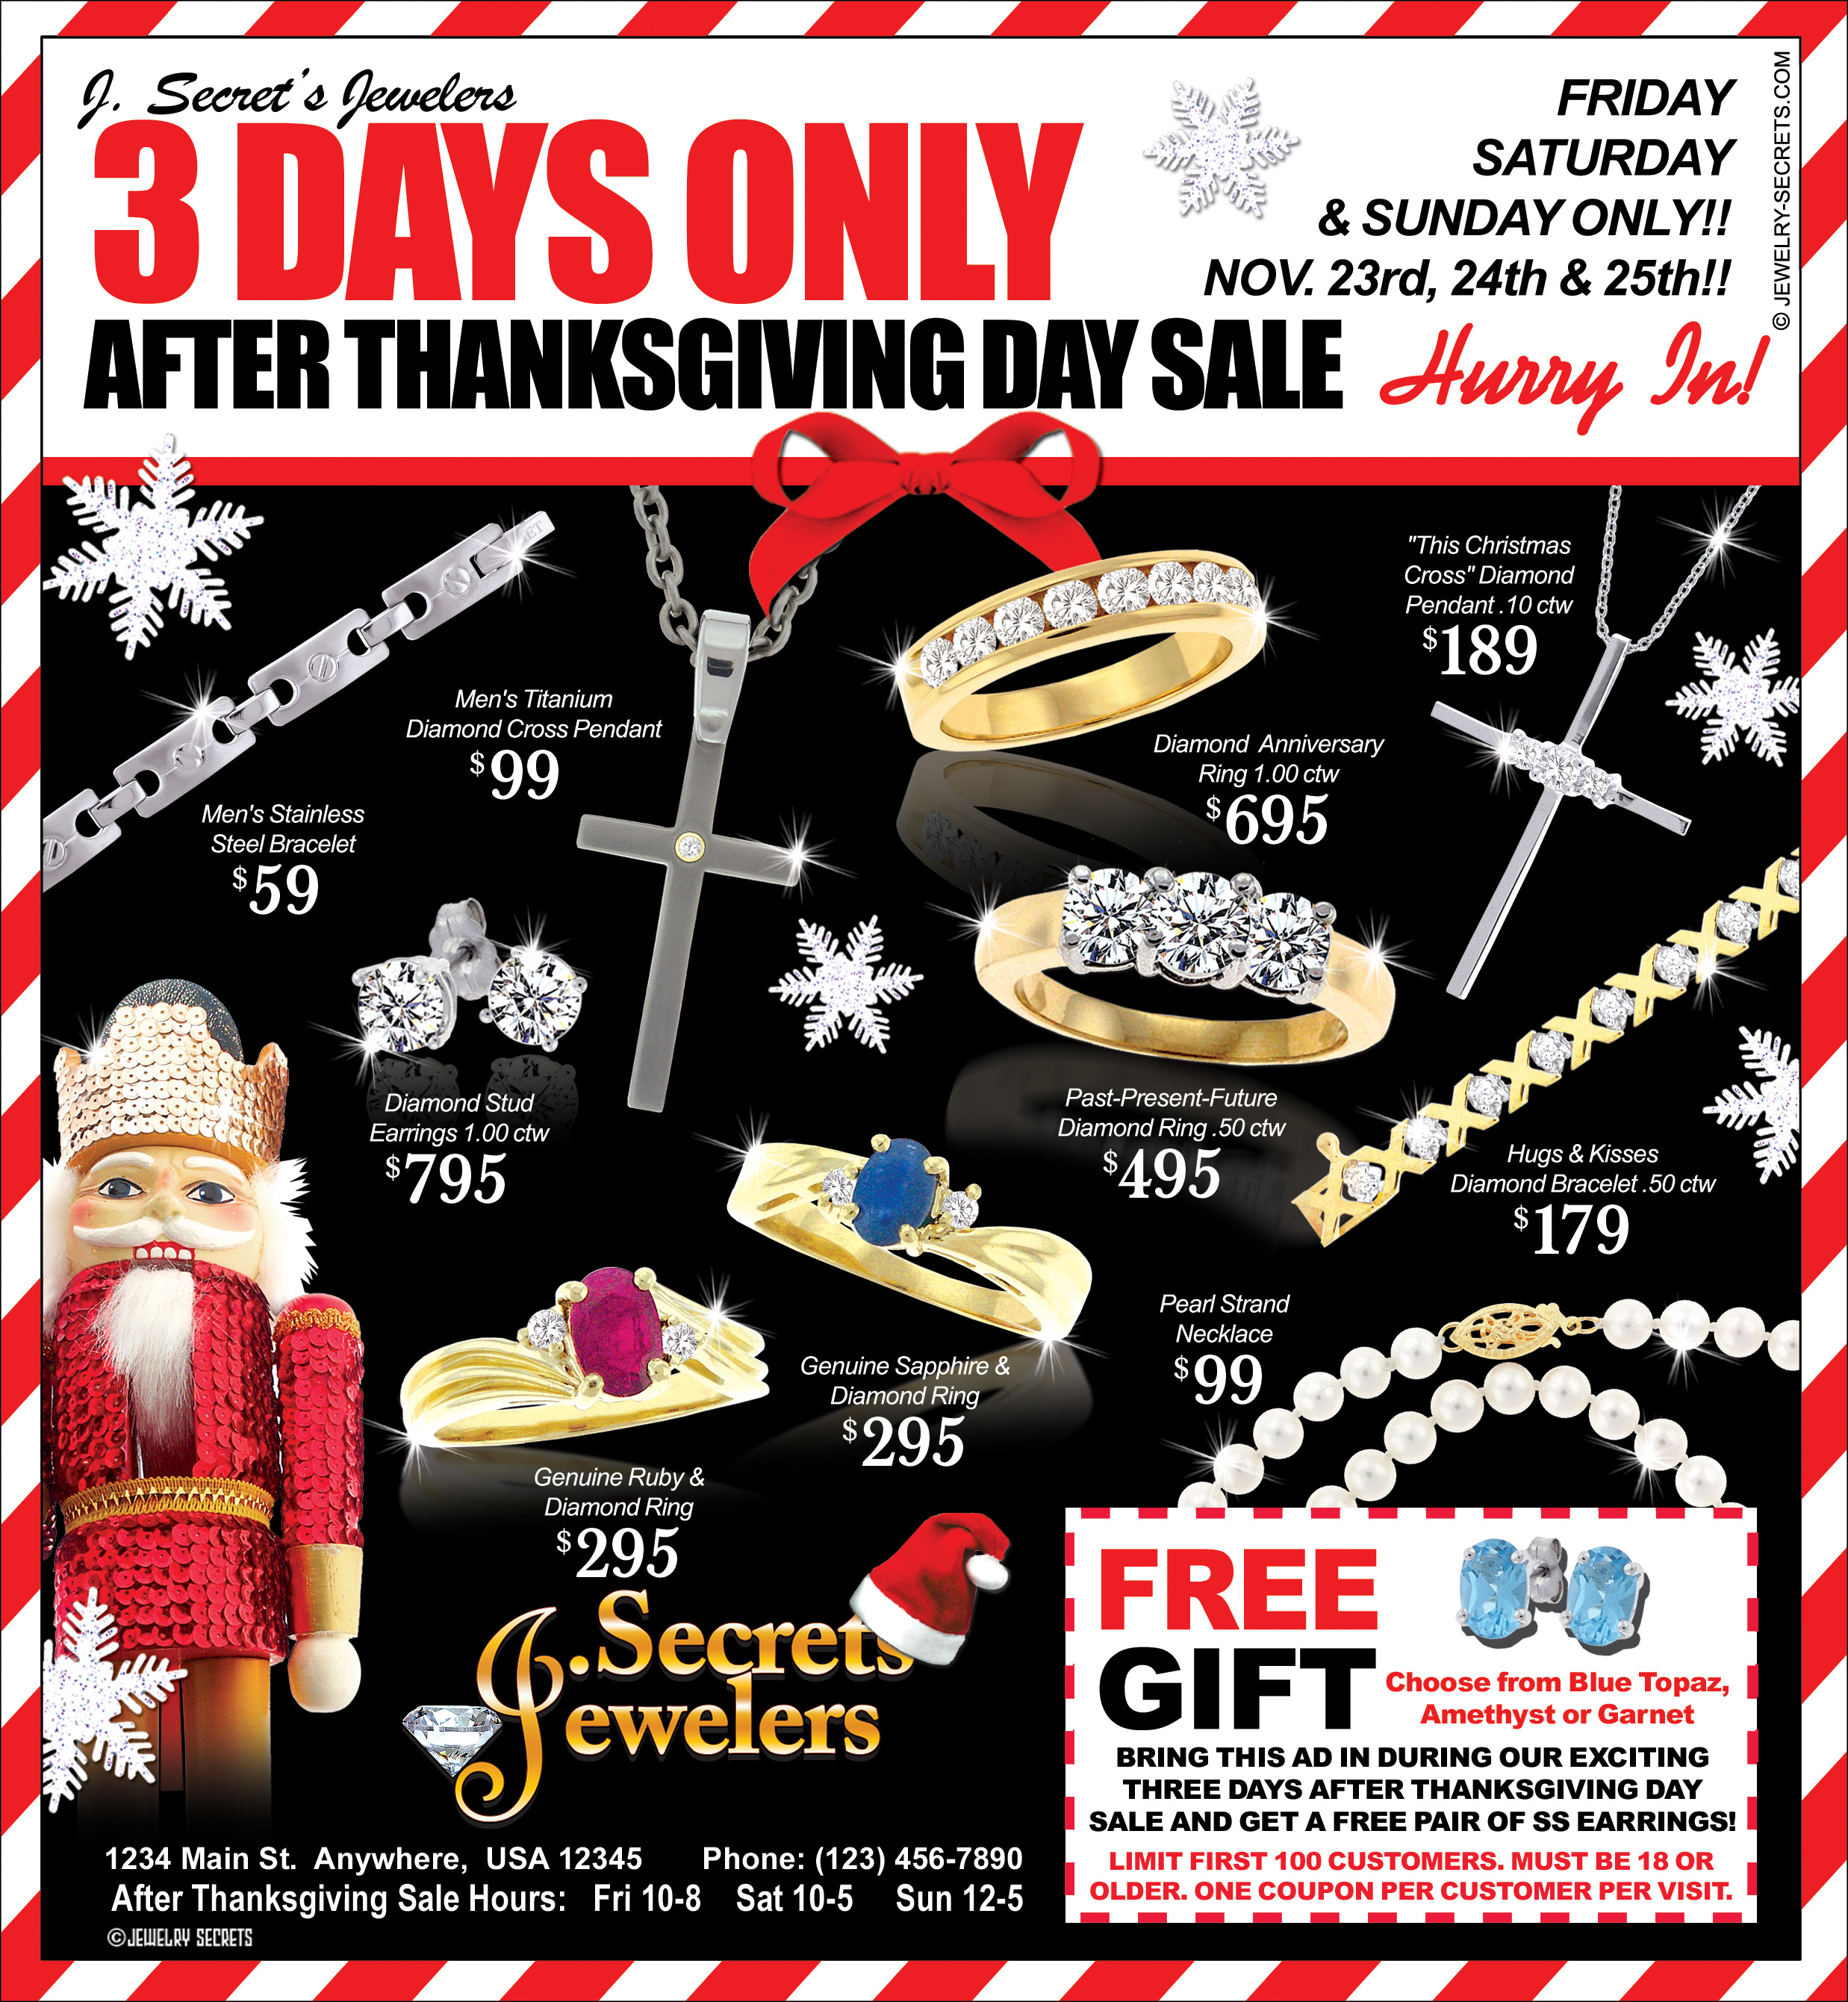 AFTER THANKSGIVING SALE SAMPLE ADVERTISEMENT - Jewelry Secrets